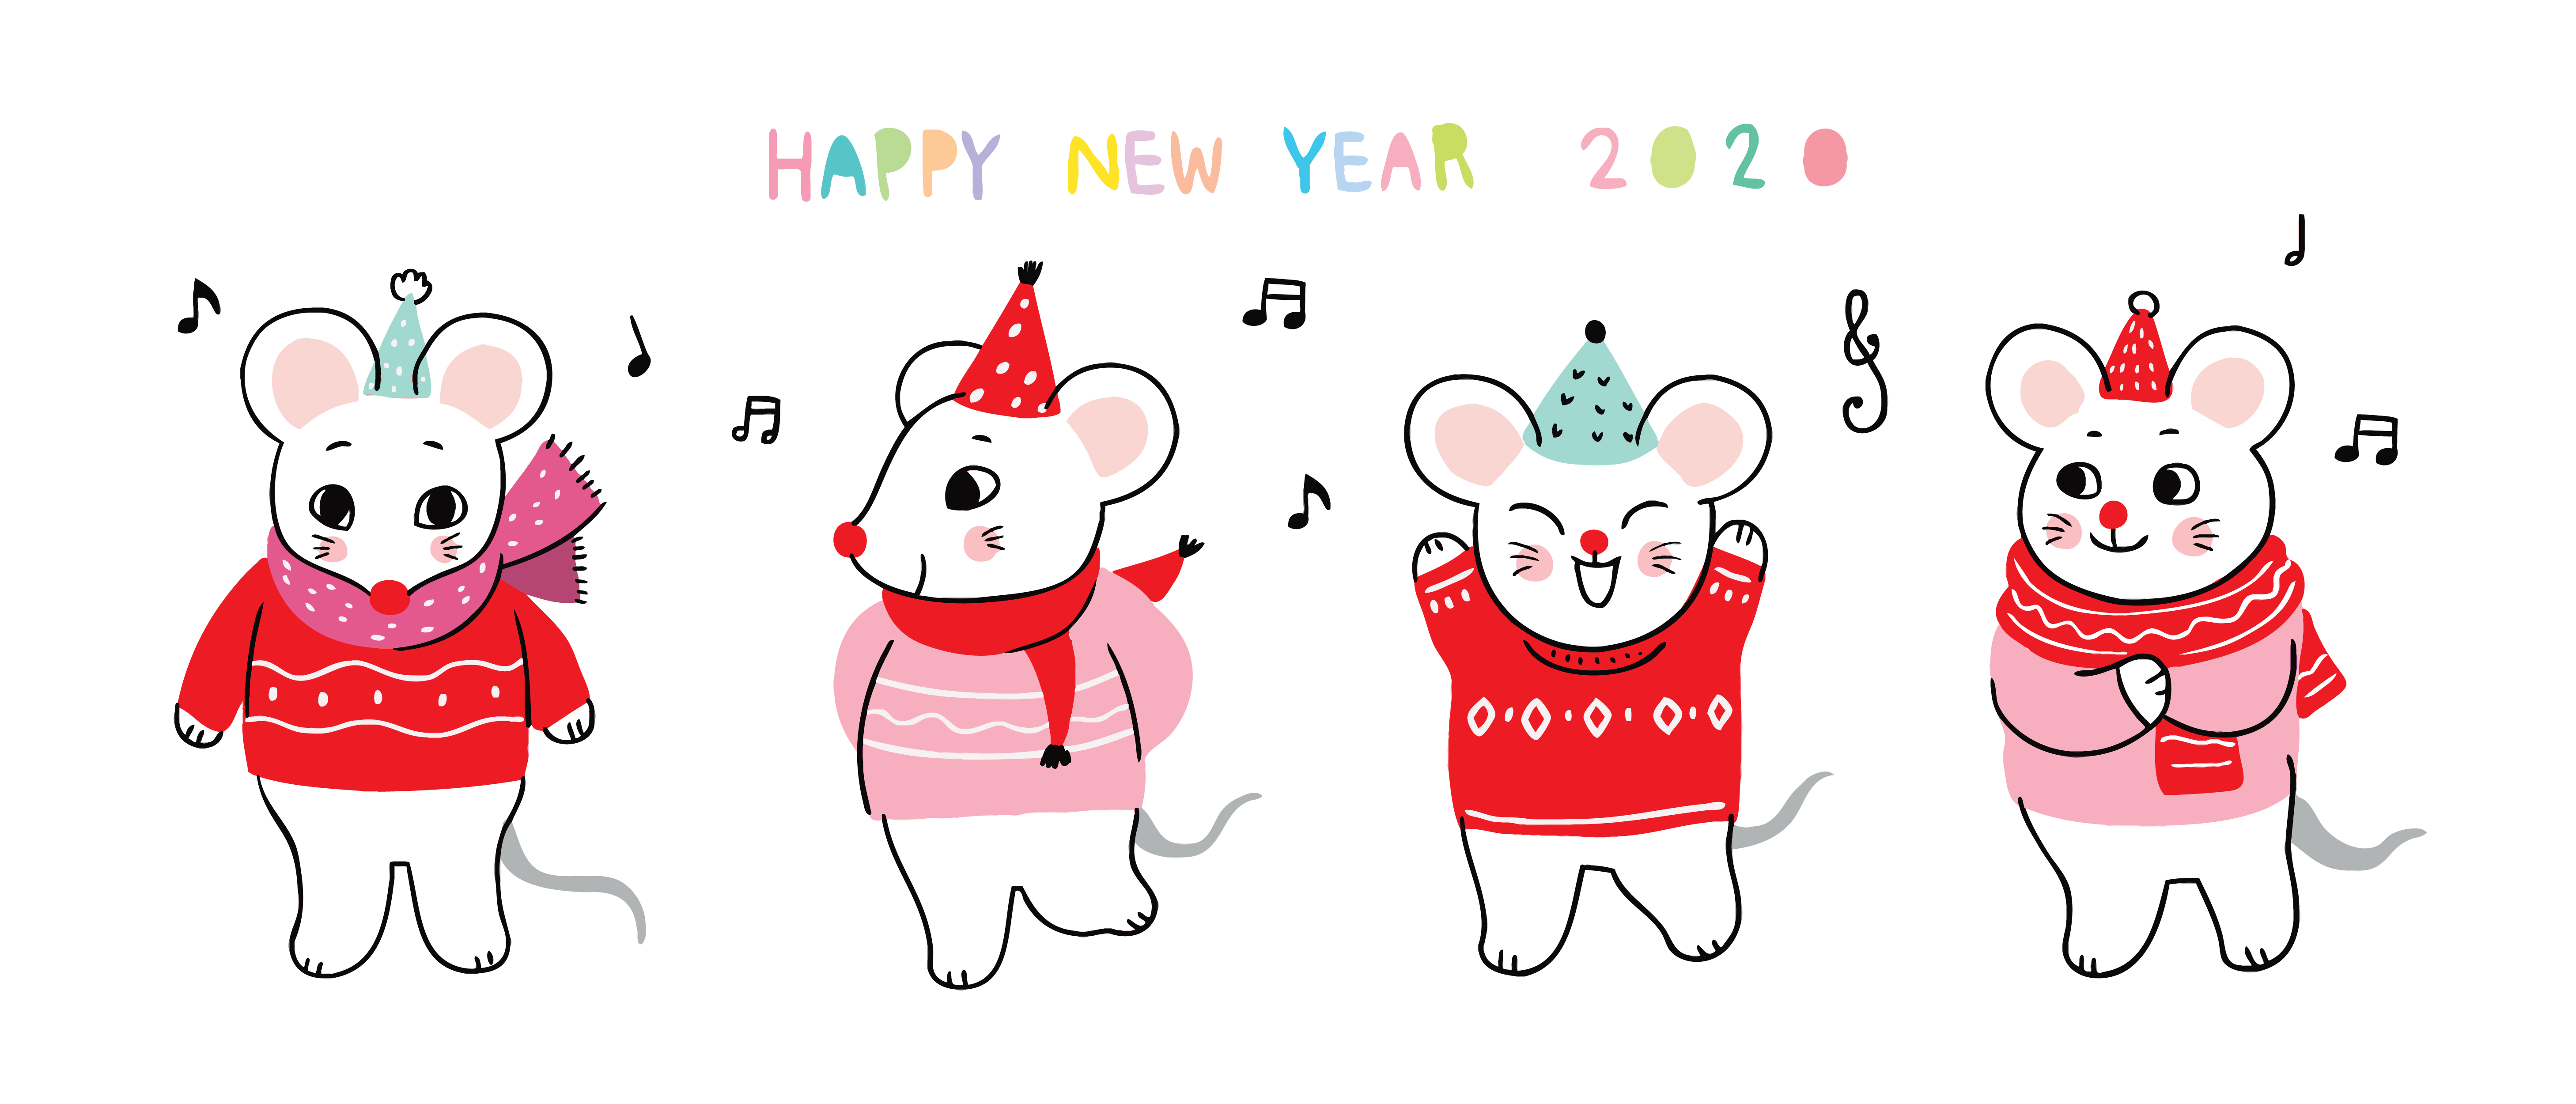 new year 2020 mouse dancing - Download Free Vectors, Clipart Graphics & Vector Art